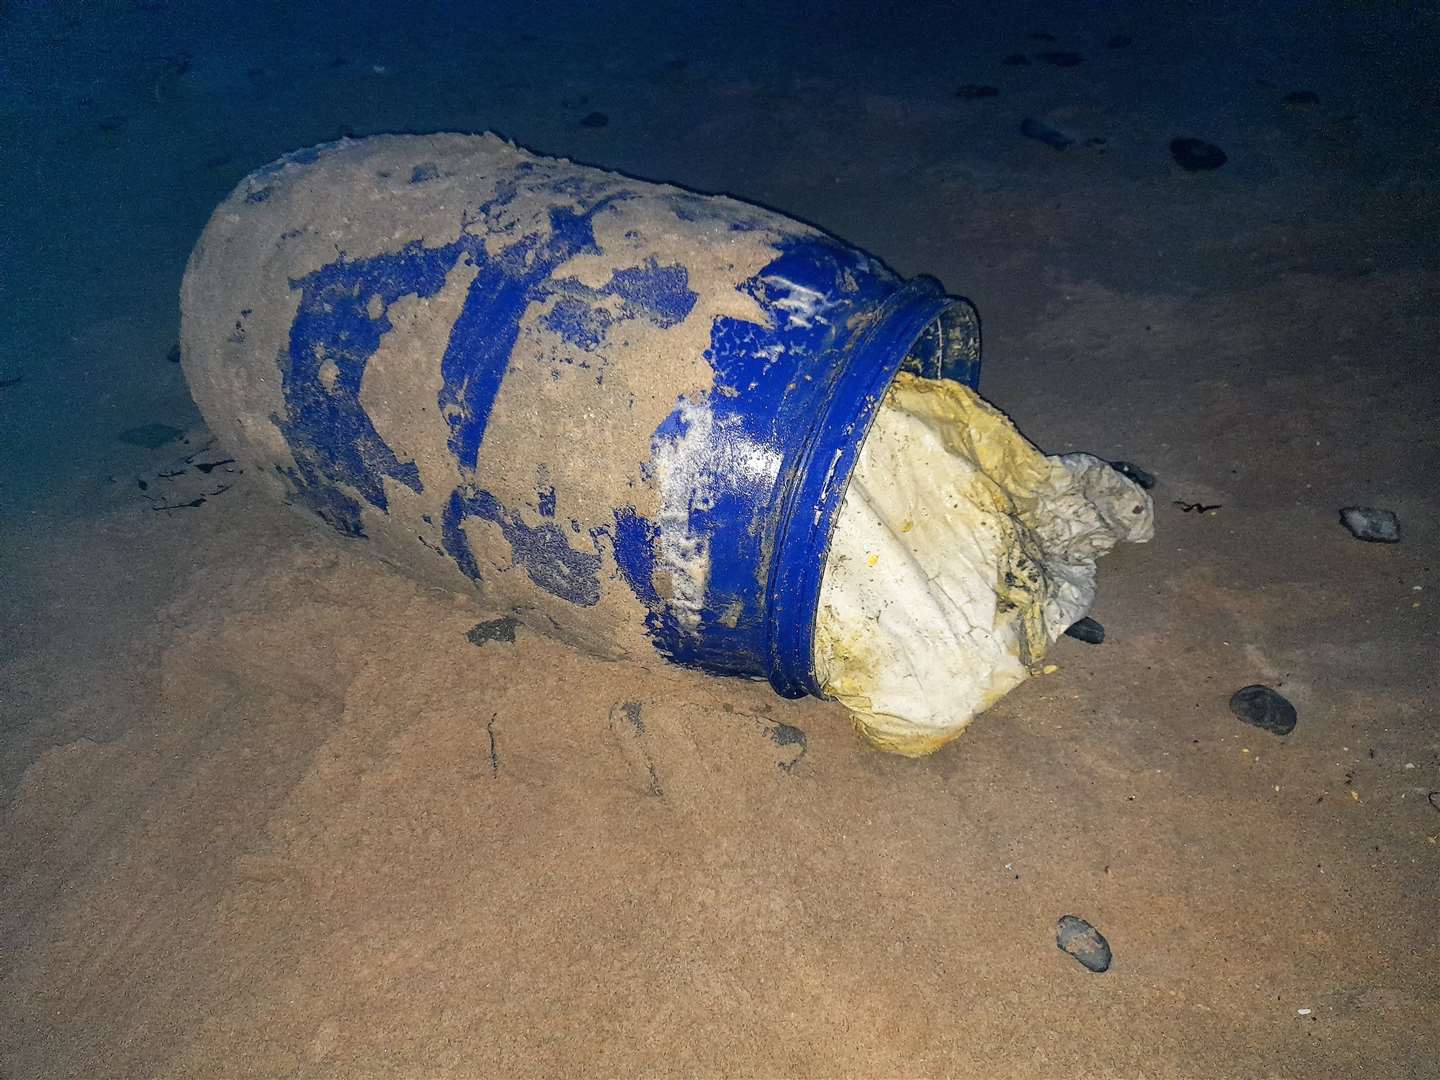 The barrel with its contents exposed at Dunnet beach last Wednesday.